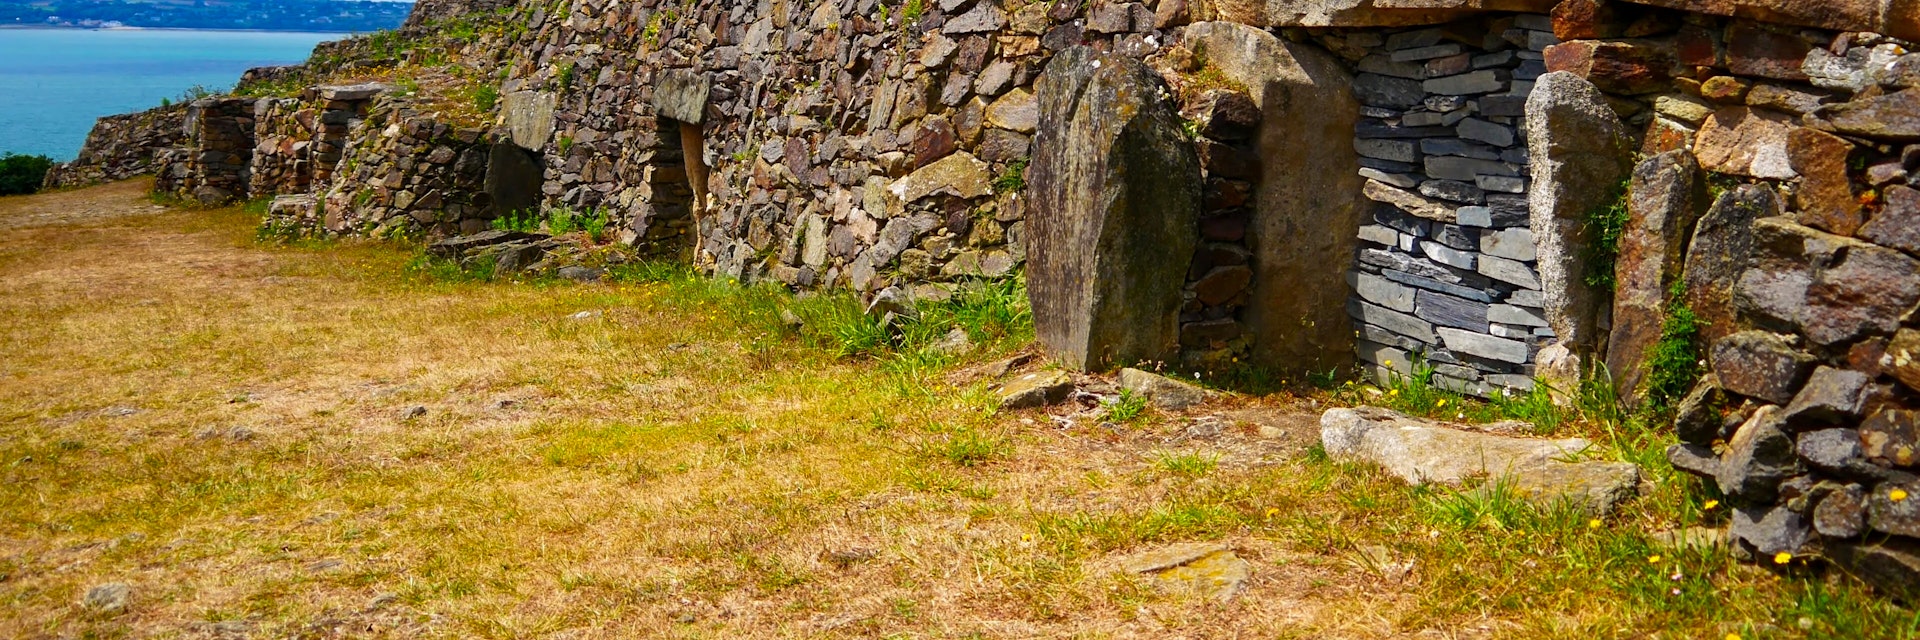 Cairn of Barnenez, in Brittany, France.